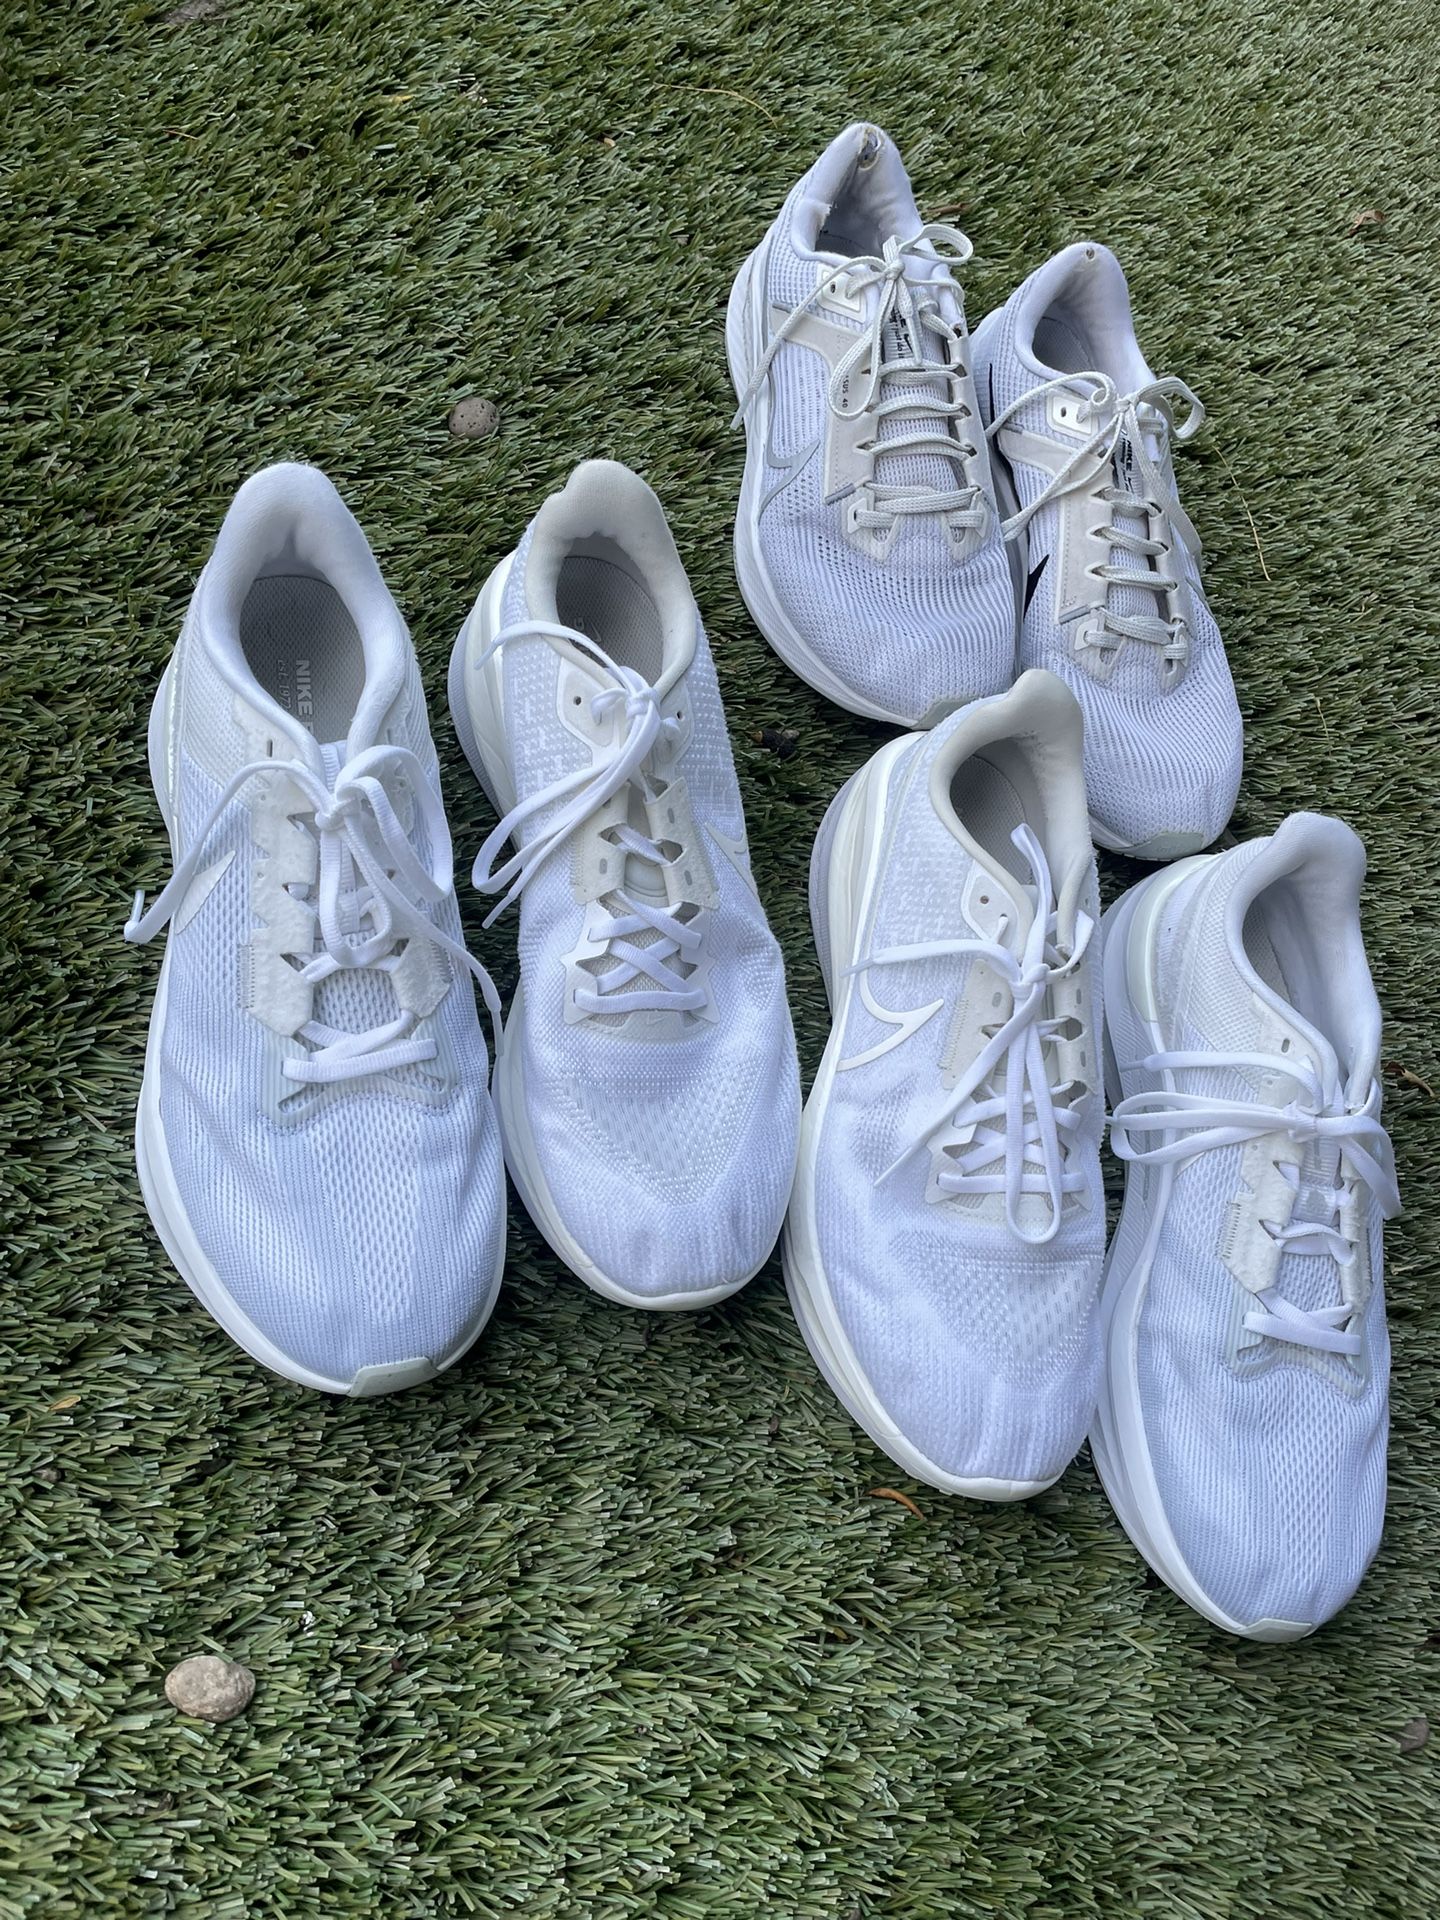 3 Pairs Of Men’s Shoes Nikes For $20 11.5